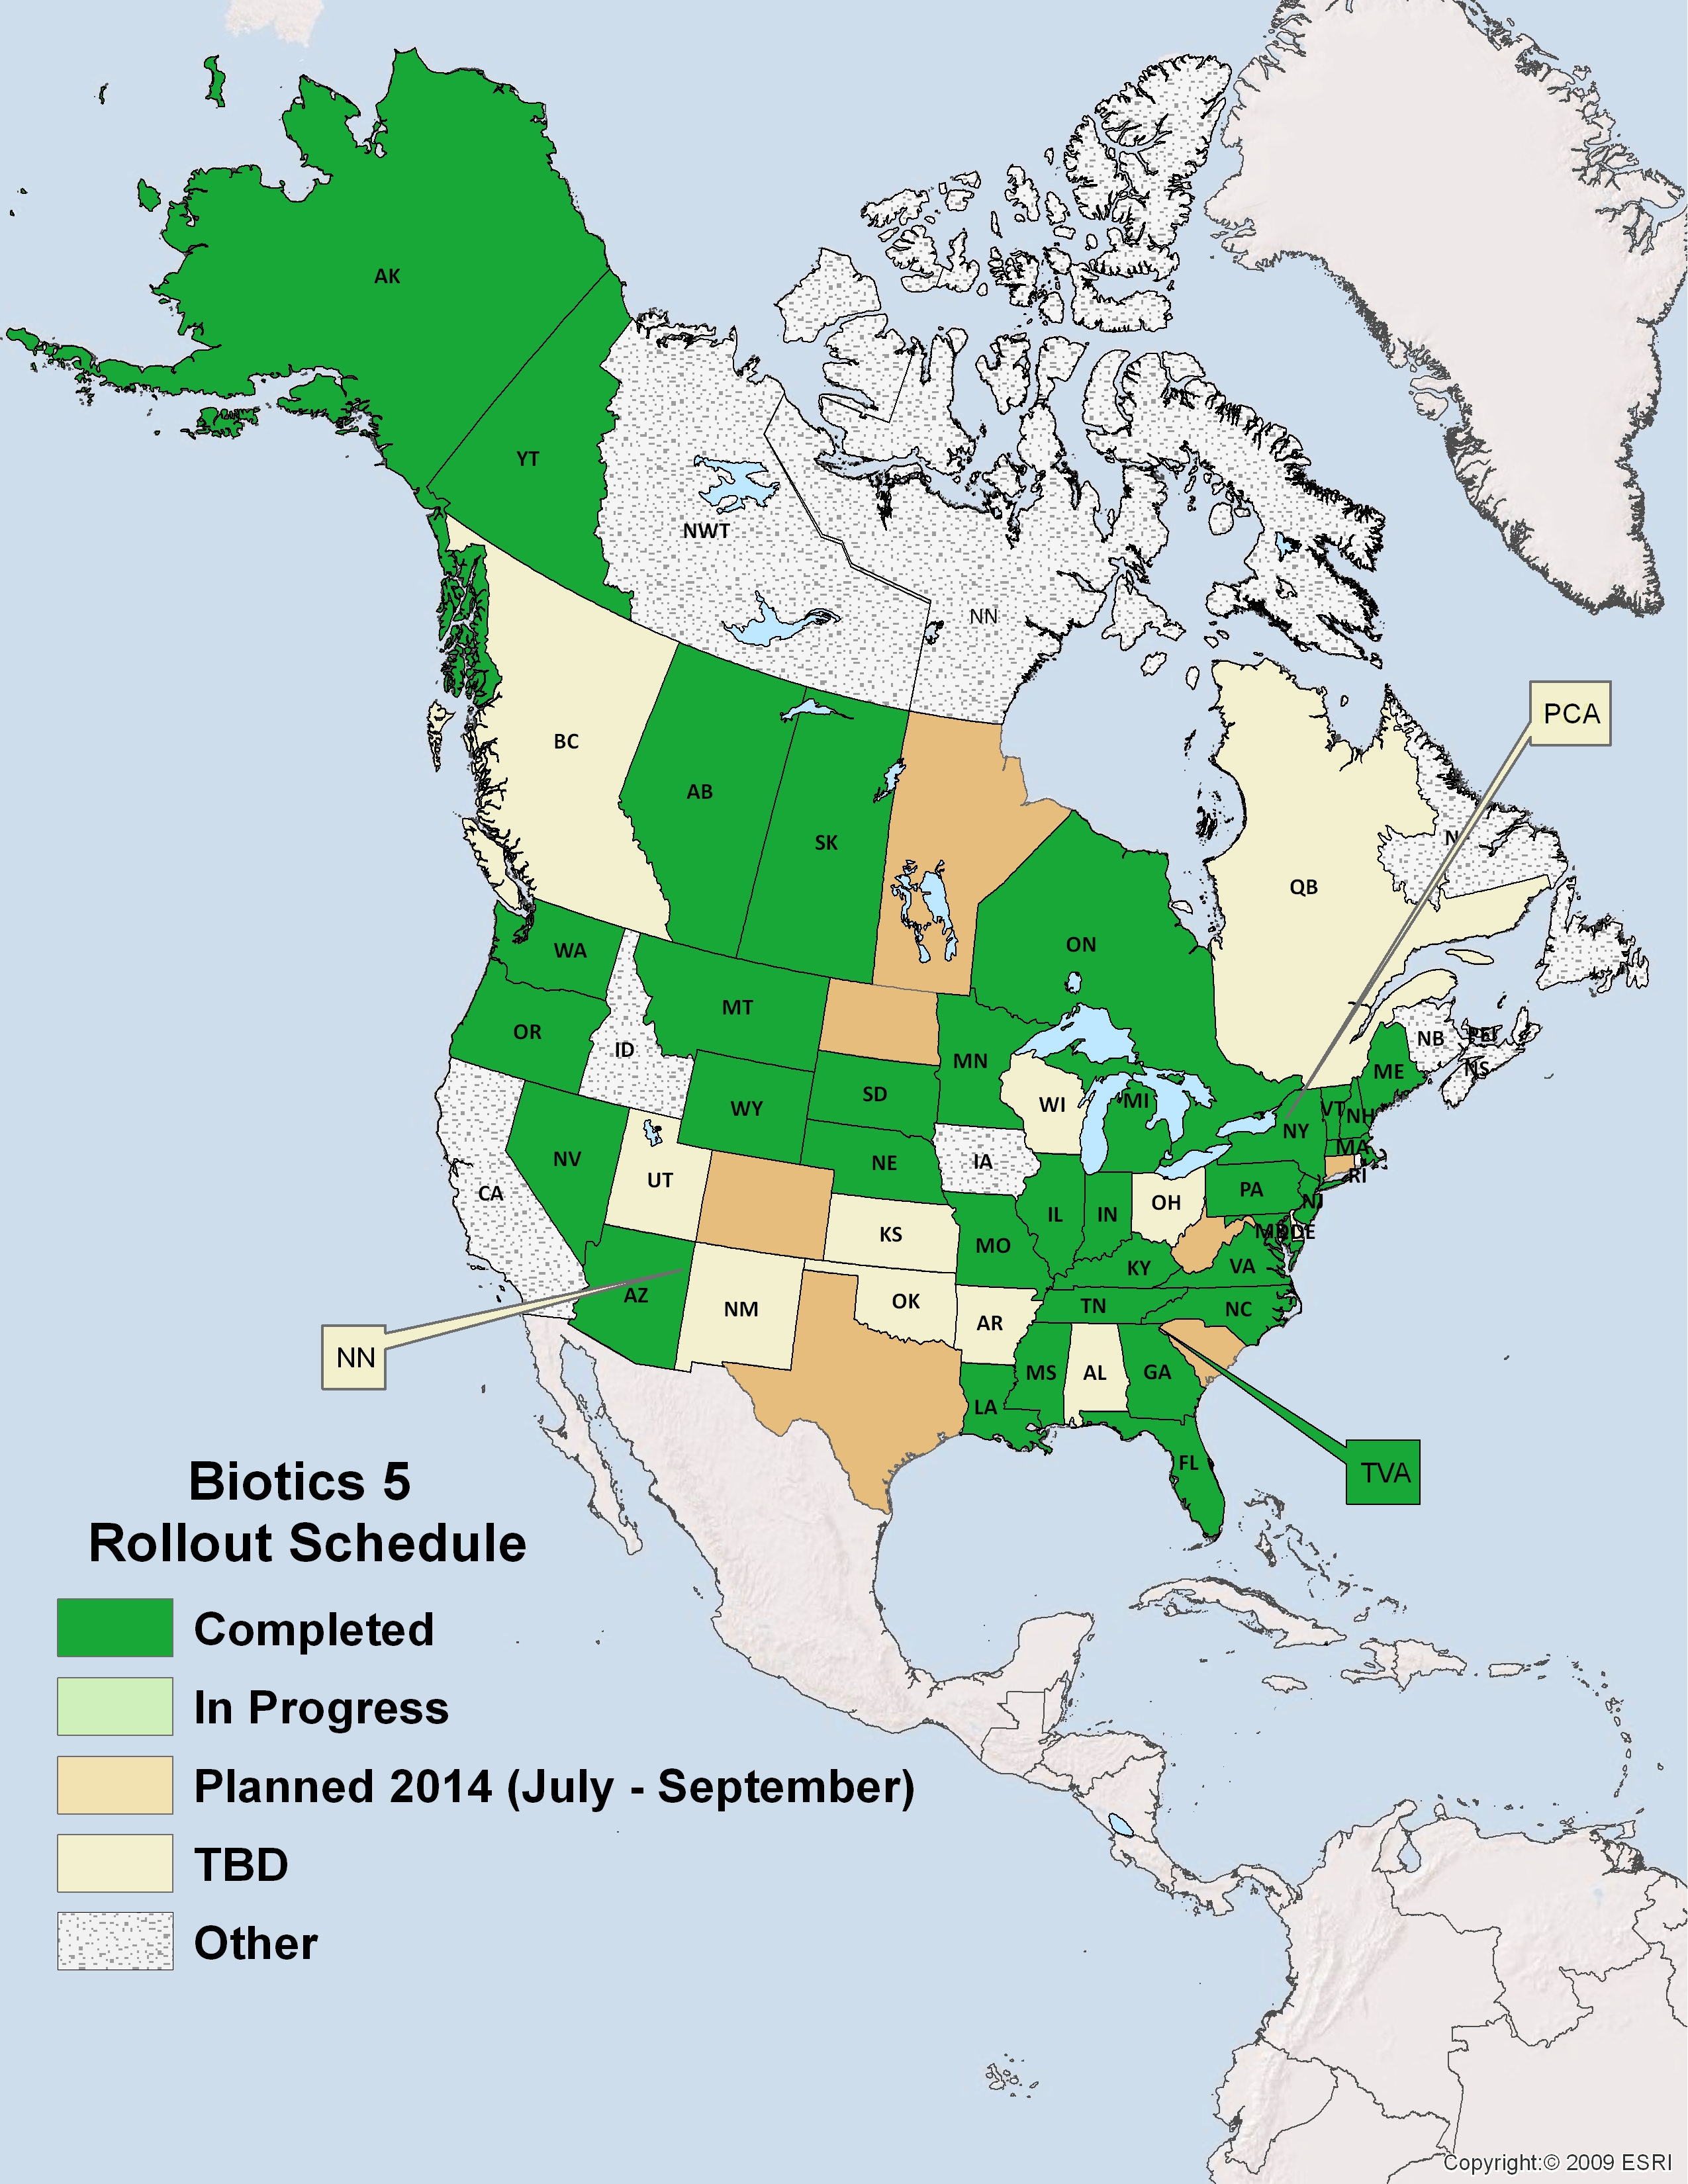 Thirty-five members of the NatureServe network have implemented Biotics 5 as of July 2014. Another dozen will follow suit in the next few months.